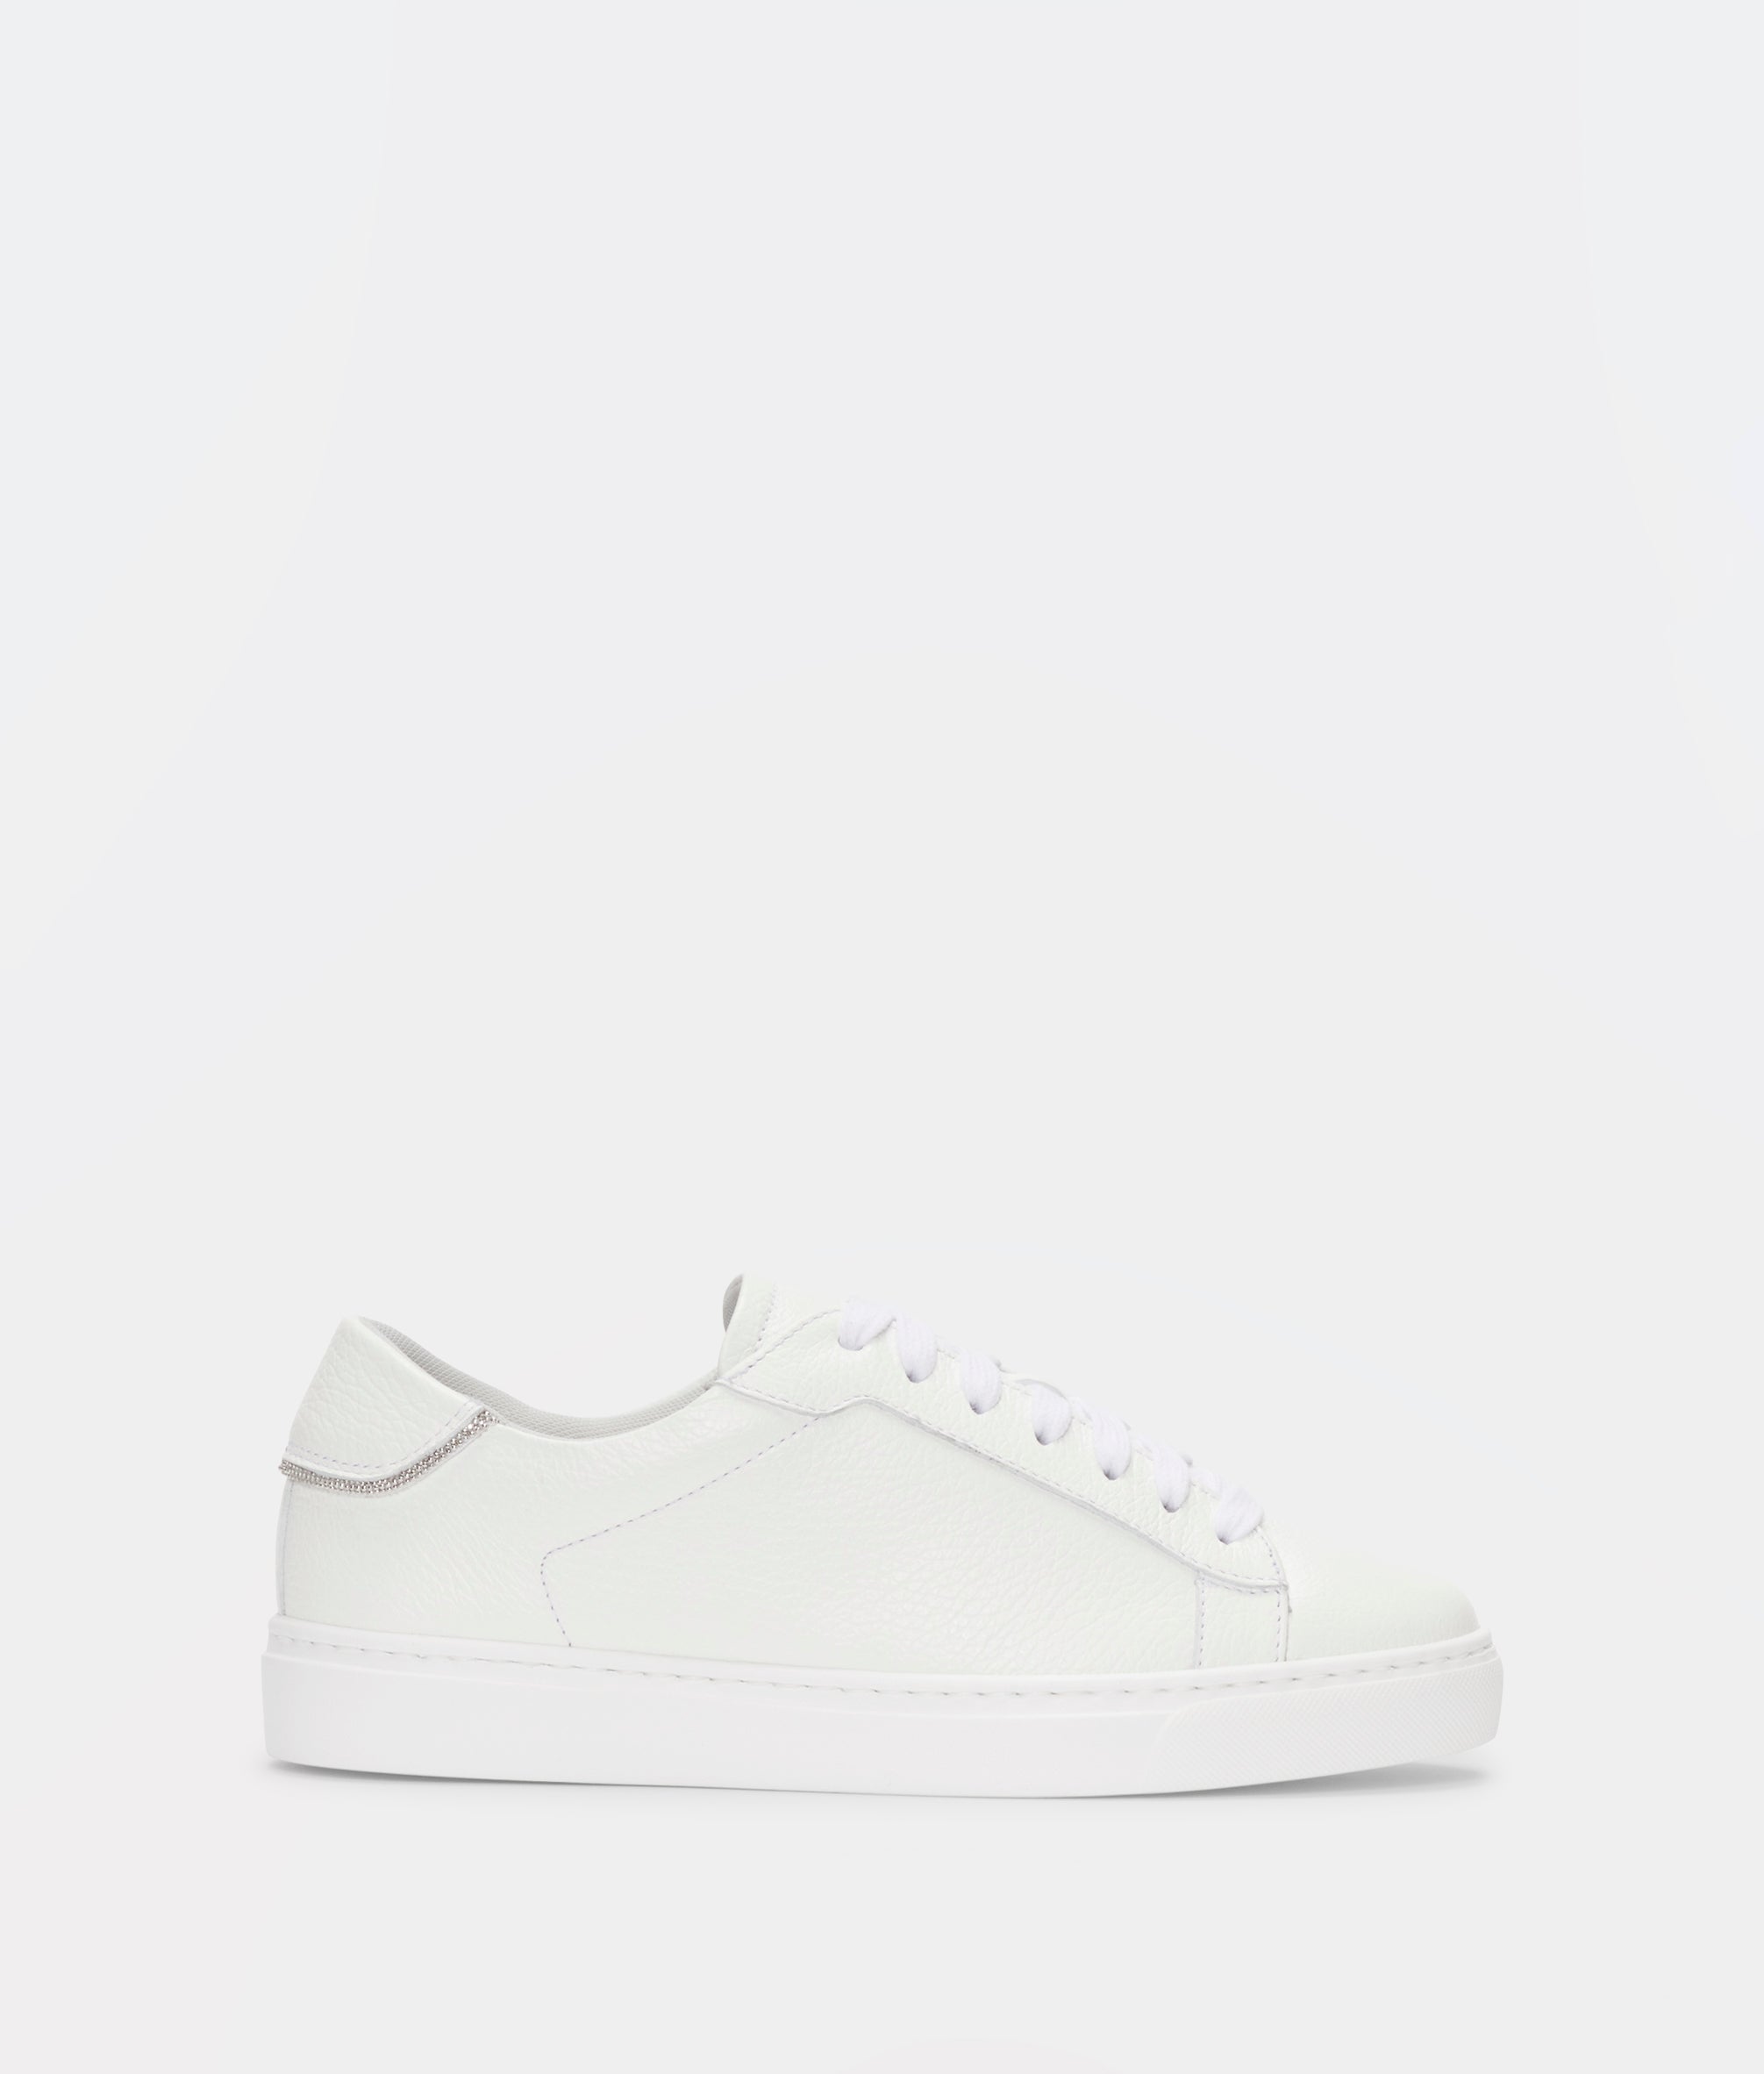 Dalila leather sneakers, white